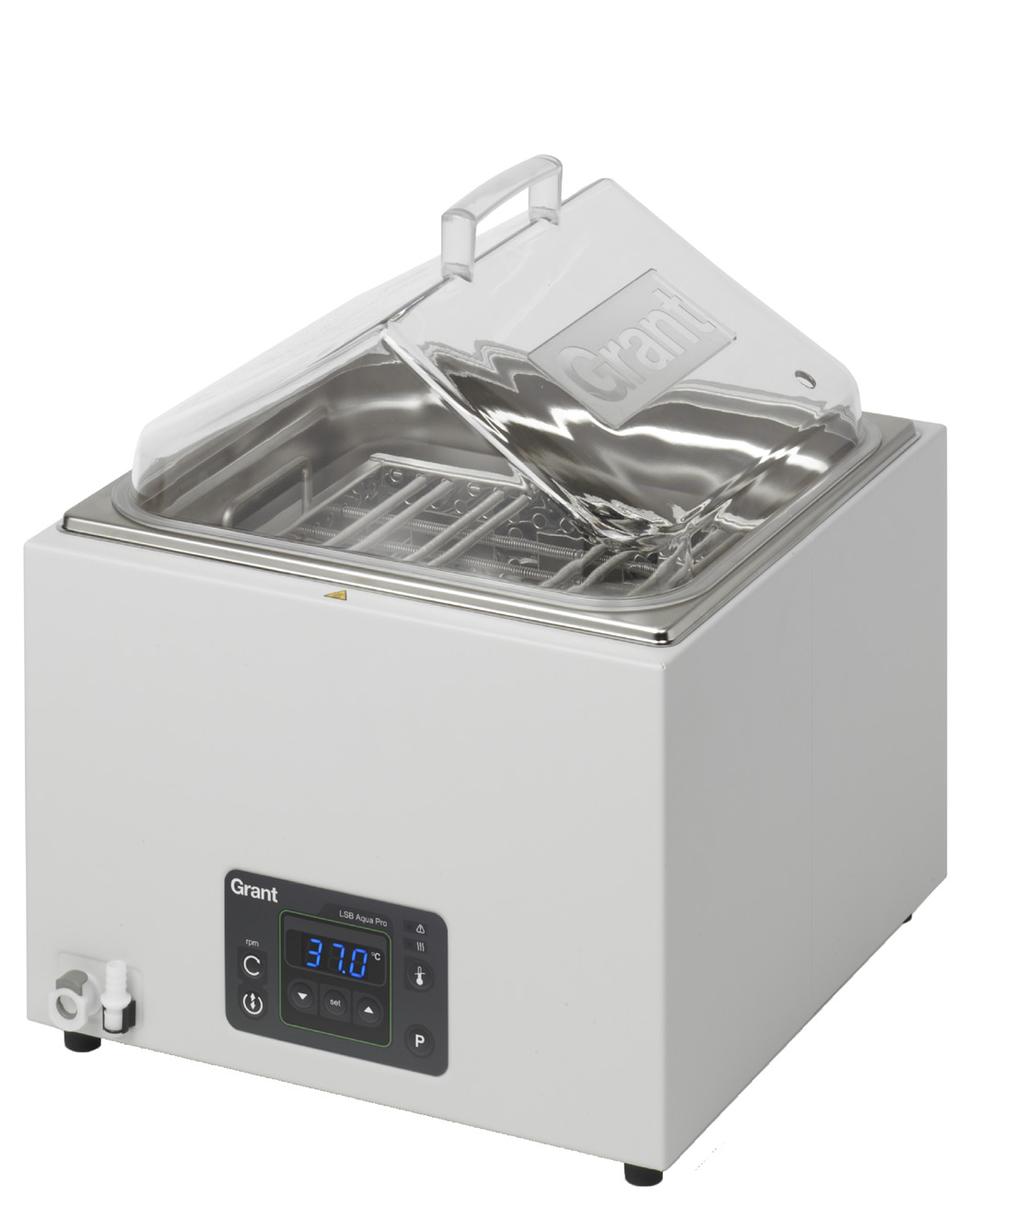 Shaking water baths» Linear shaking water bath LSB Aqua Pro range Linear shaking water bath LSB Aqua Pro range Grant quality and design combined with the temperature stability and functions you need